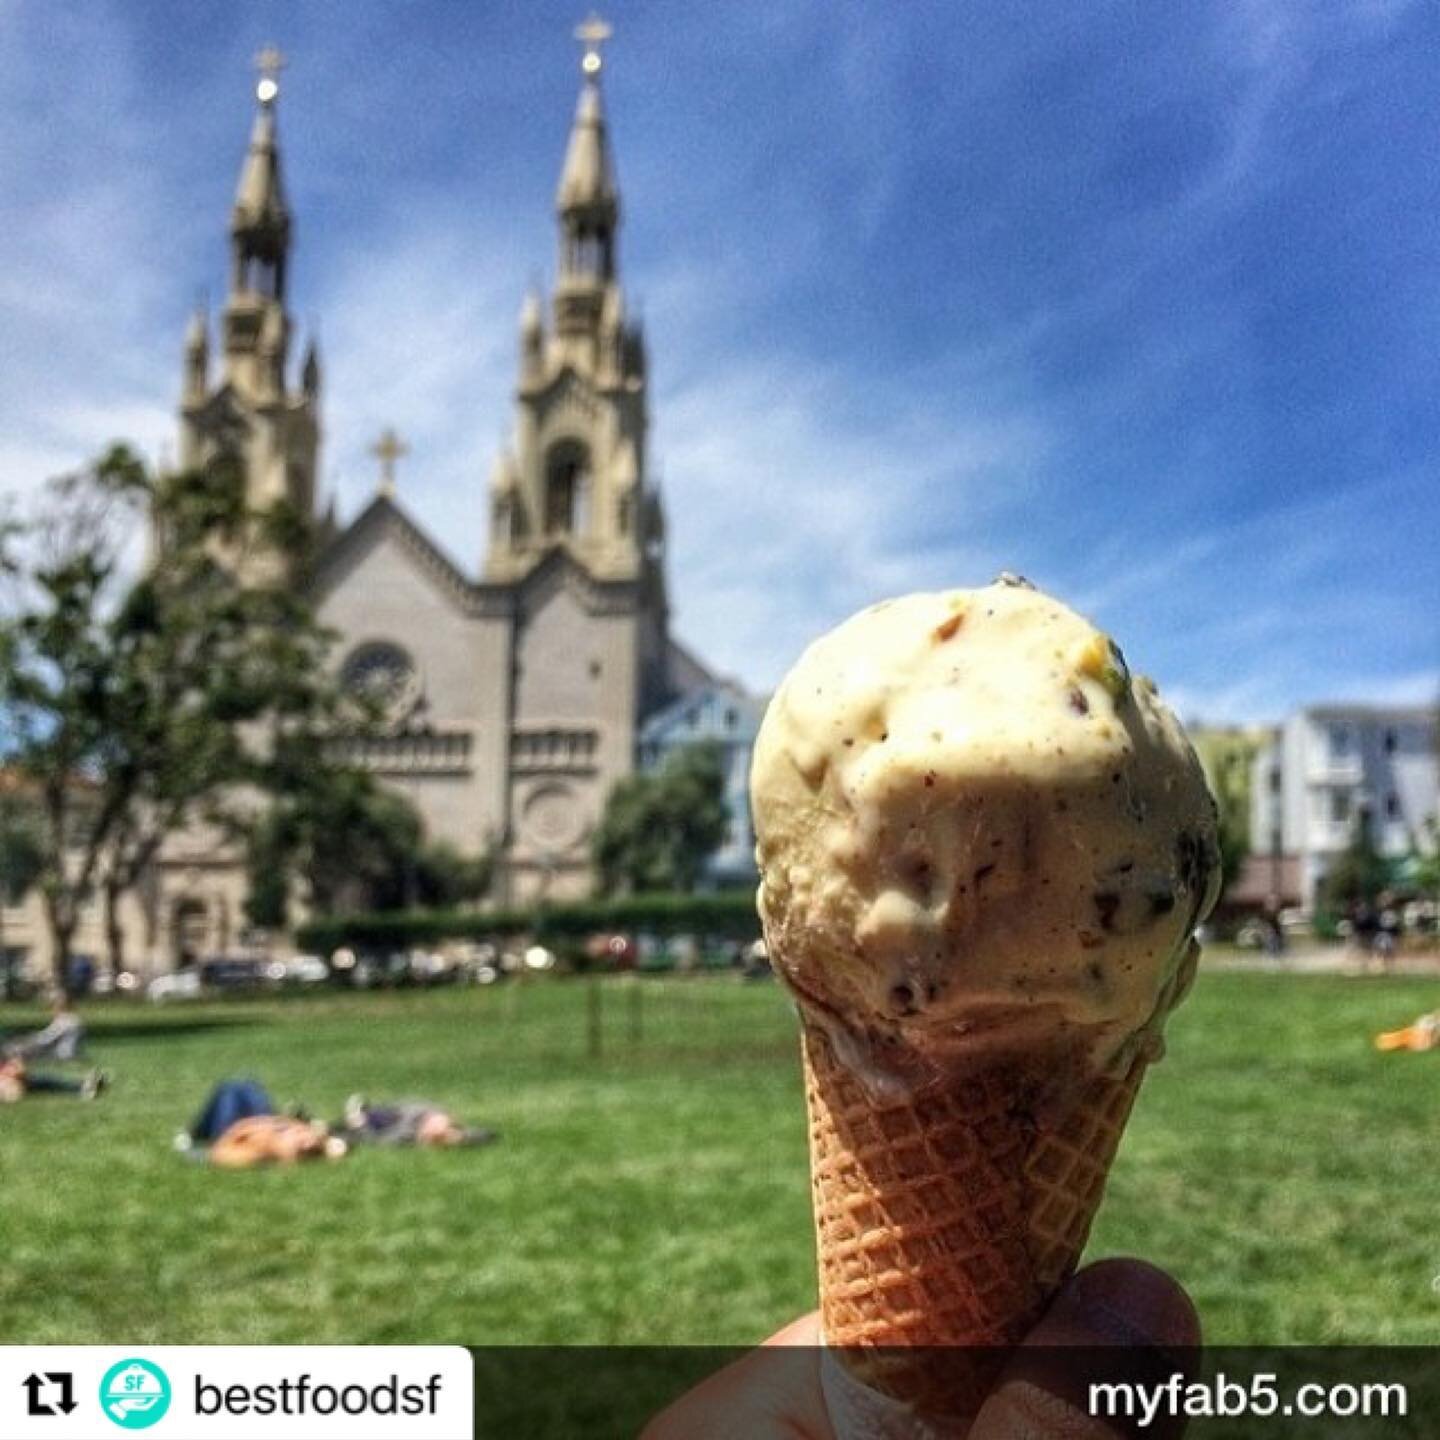 Make today a treat! Pistachio Gelato from Gelato Classico, currently the #5 spot for Gelato on #myfab5. Loving the #foodintheair pic @mo_alobaidan!
#myfab5 #foodporn #foodie #sf #Gelato #italian

Share your &quot;bucket lists&quot; with your friends 